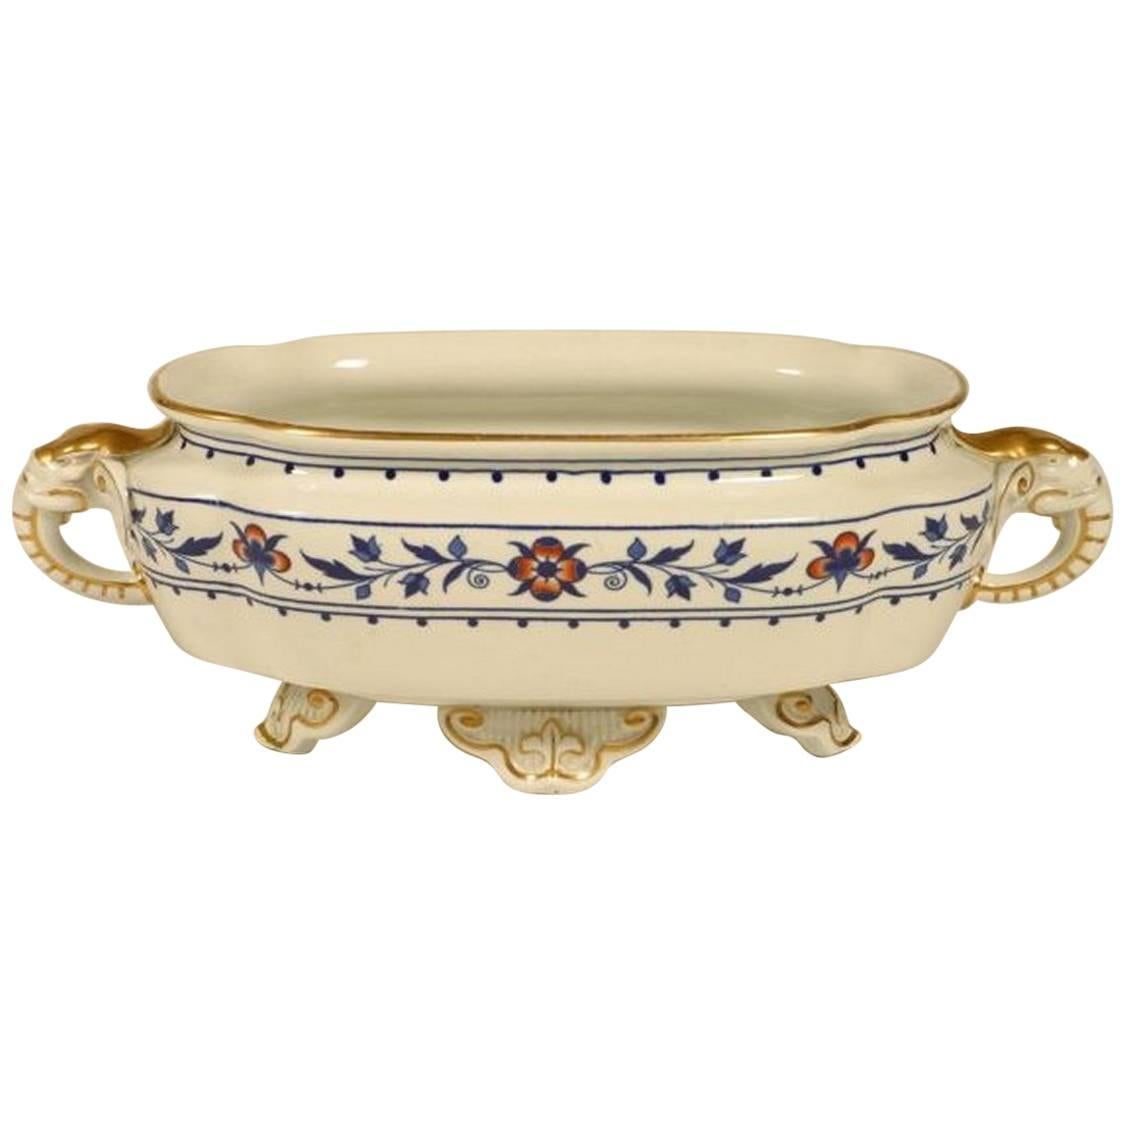 Dr C Dresser, Attributed Made by Royal Worcester, Blue & White Elephant Tureen For Sale